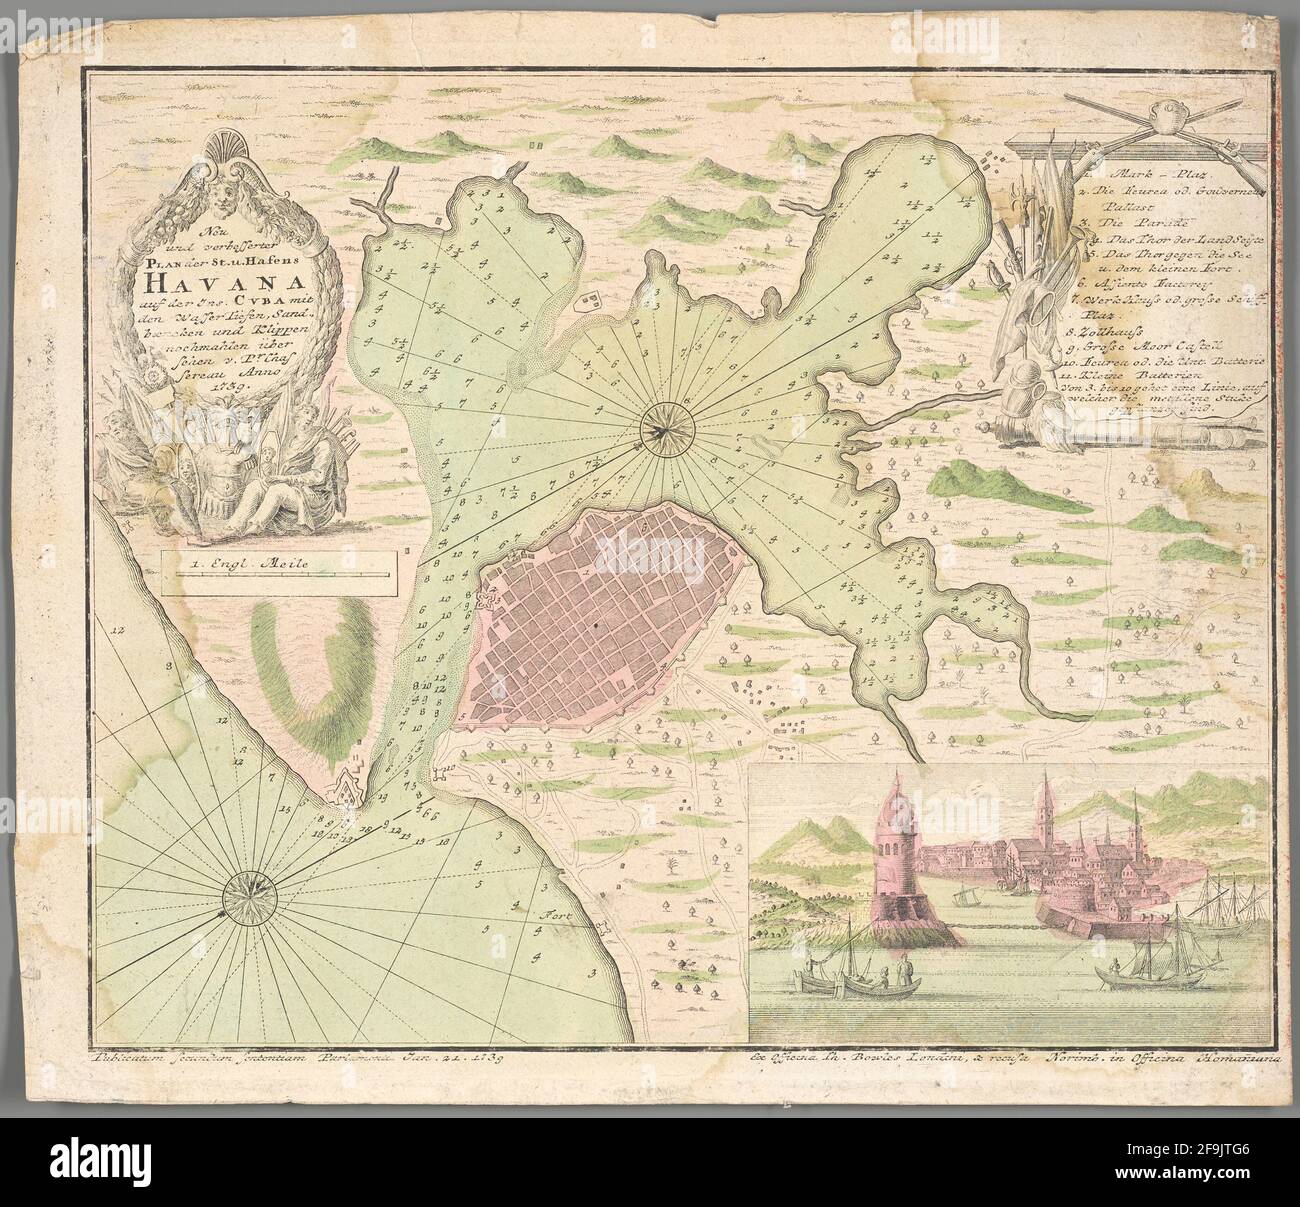 Vintage hand drawn Homann's map of - from 18th century. All maps are beautifully colored and illustrated showing known world at moment. Stock Photo